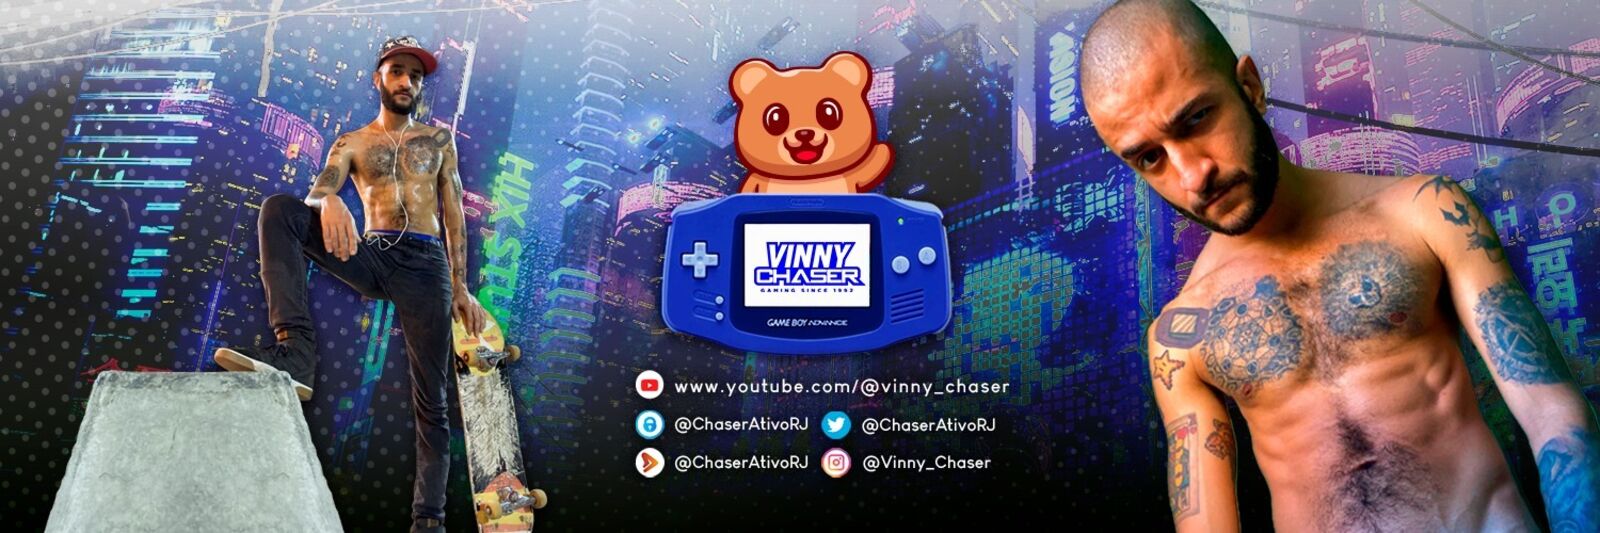 See Vinny Chaser profile